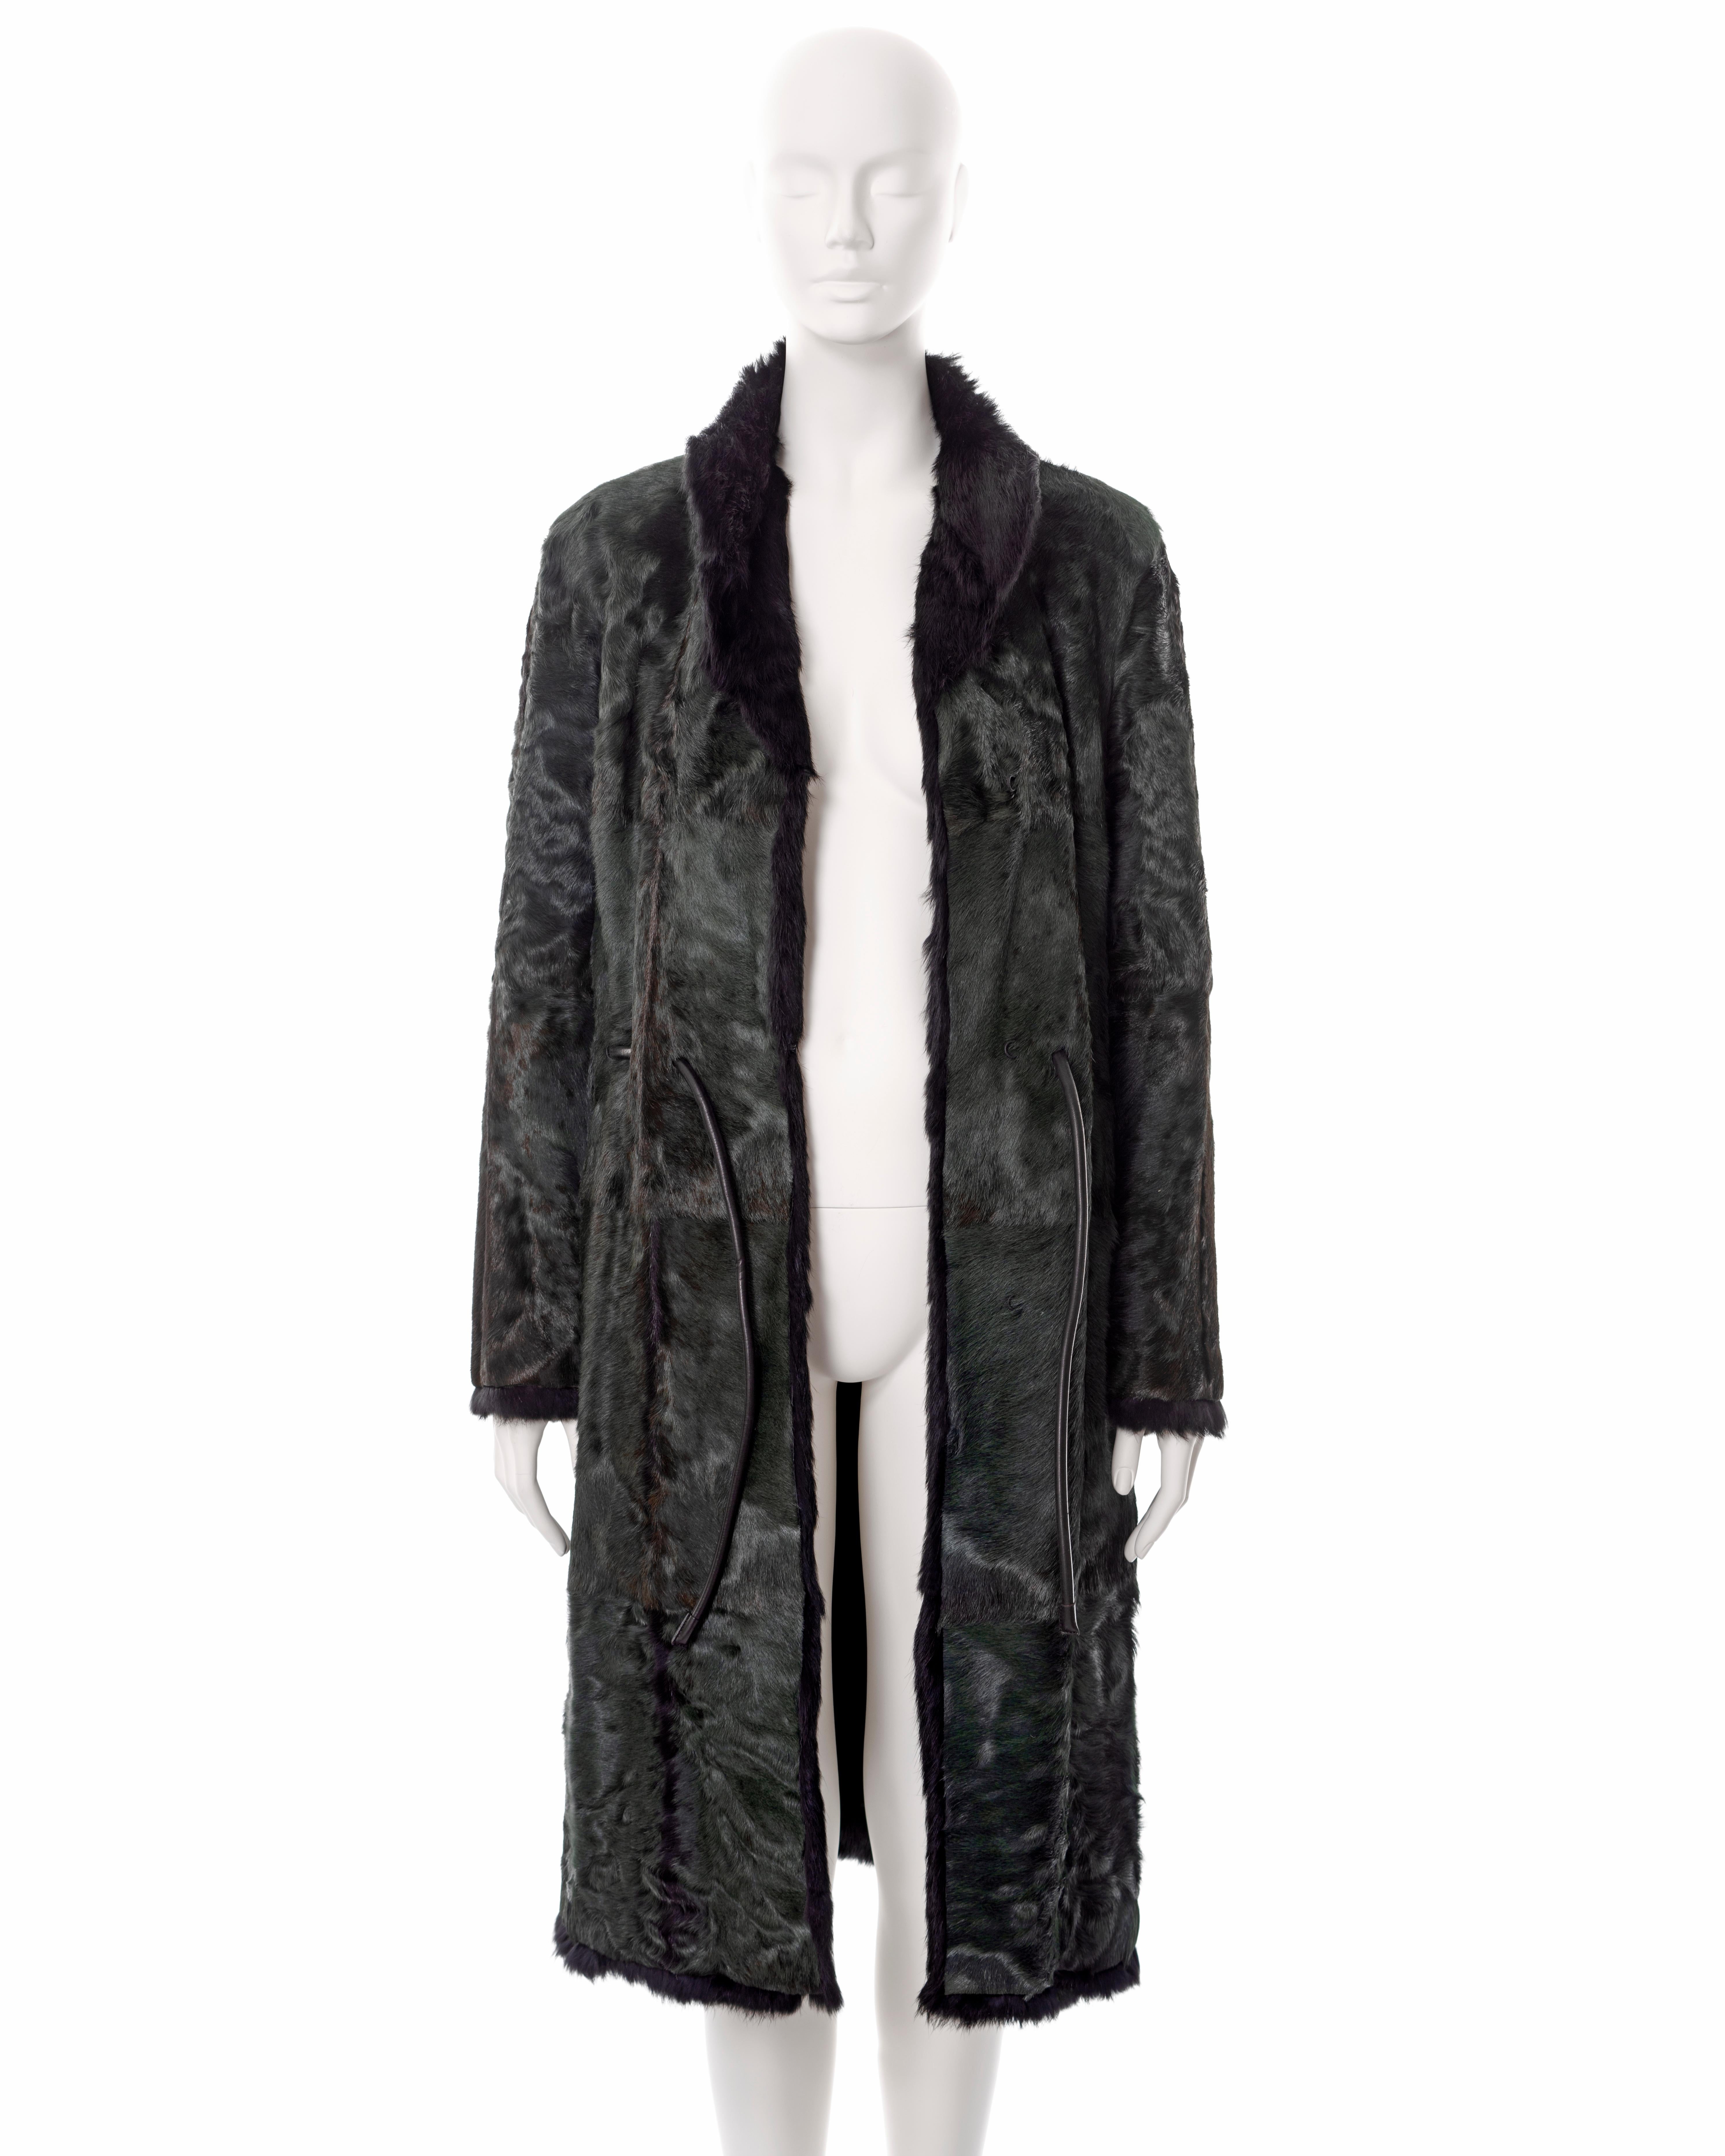 Gucci by Tom Ford reversible green and black fur coat, fw 1999 For Sale 1